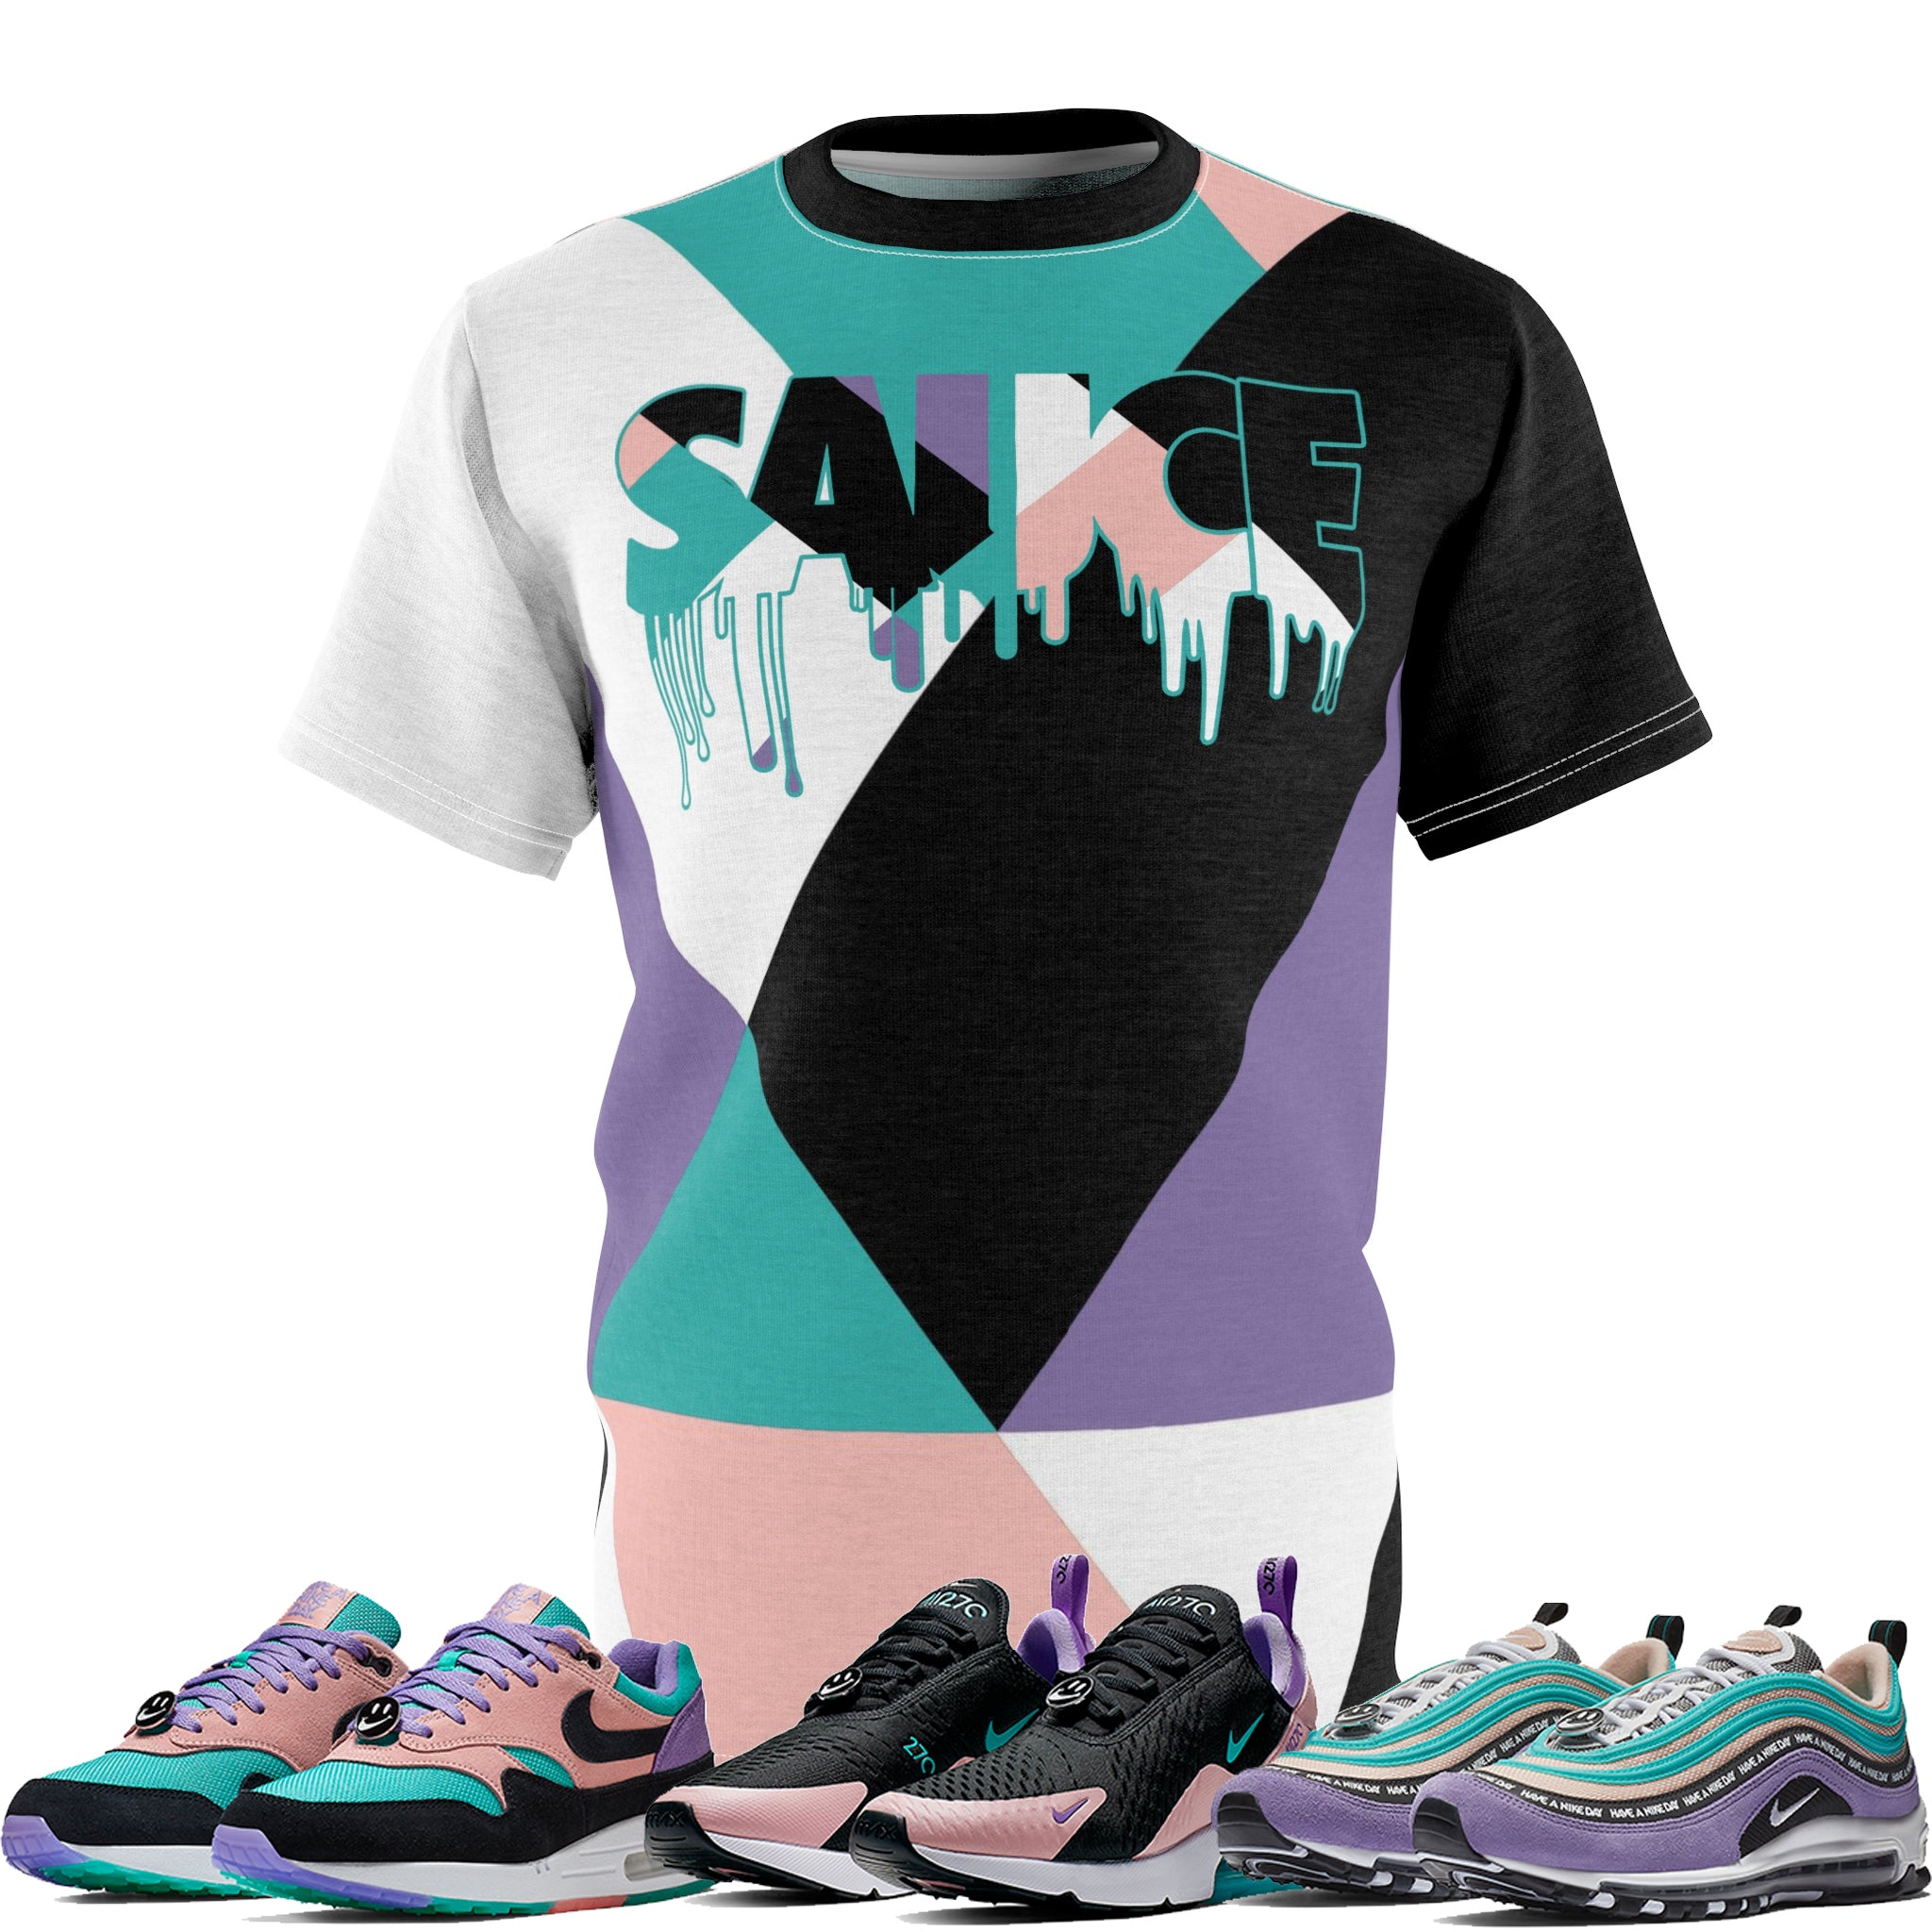 toy Hobart bark Shirt to Match Air Max 270 Have A Nike Day Sneaker Colorway "Sauce" T- –  NowServingShirts